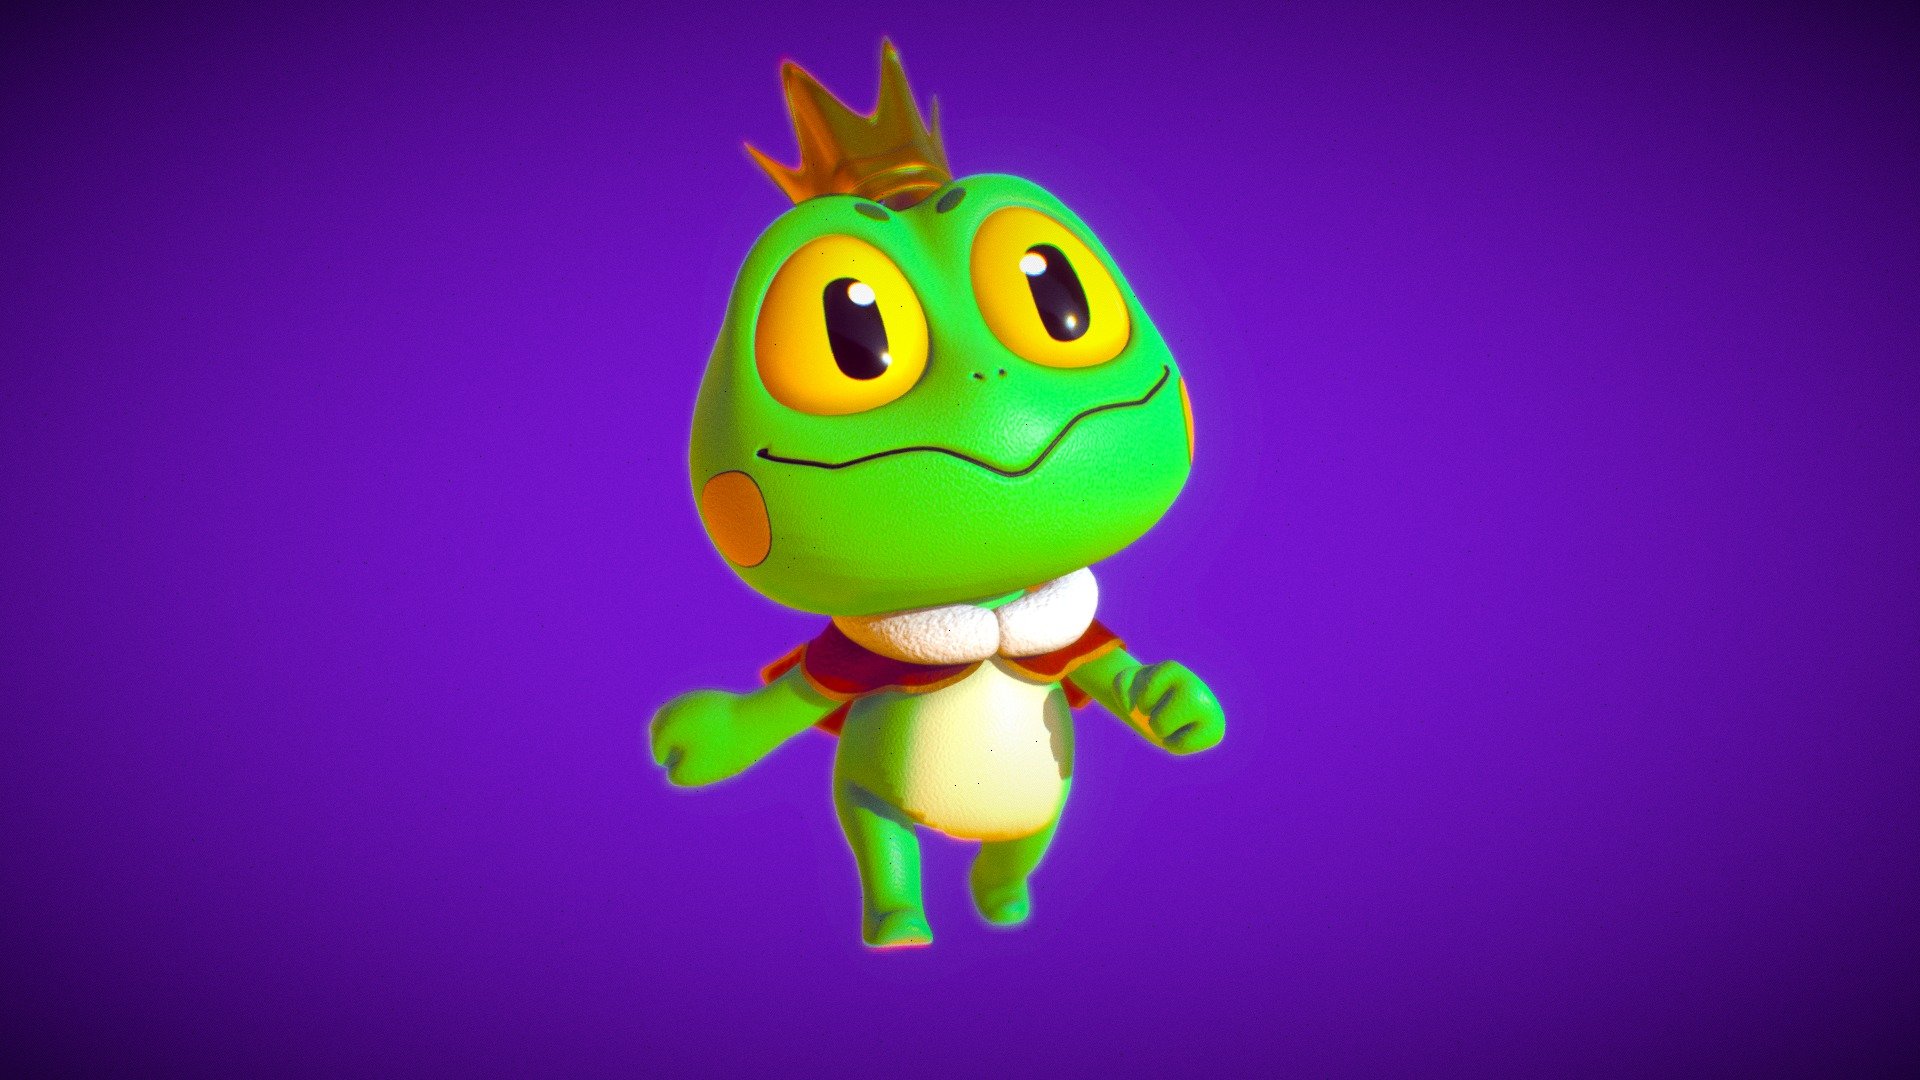 Here comes the Frog King! - Frog King - 3D model by IgorSan 3d model